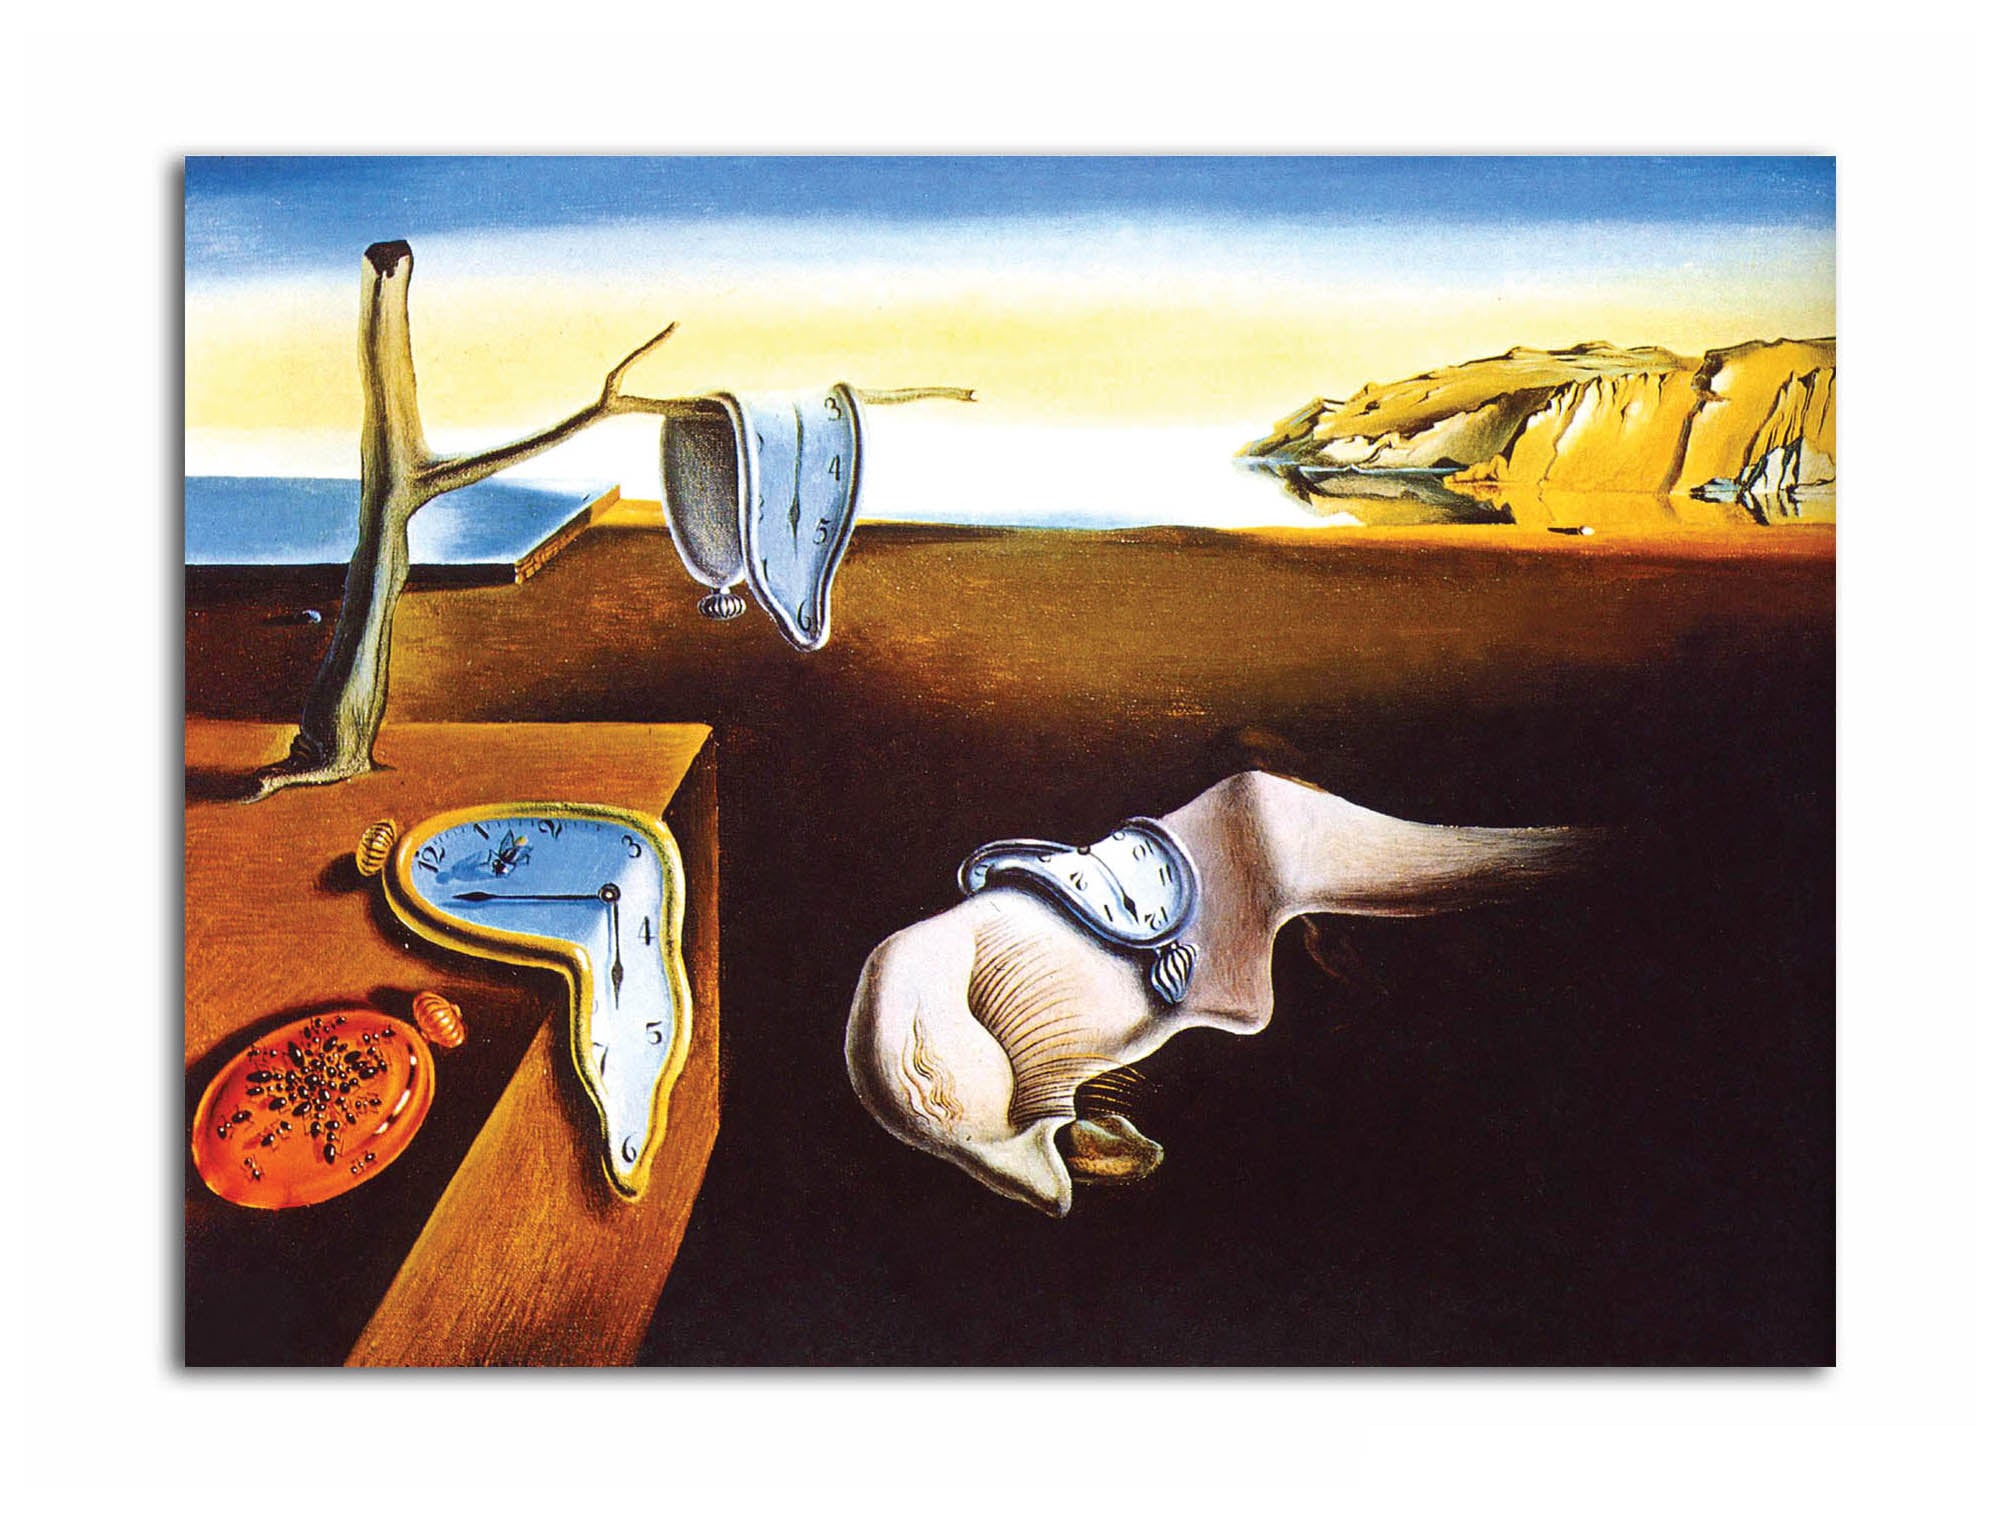 The Persistence of Memory  - Canvas Painting - Unframed